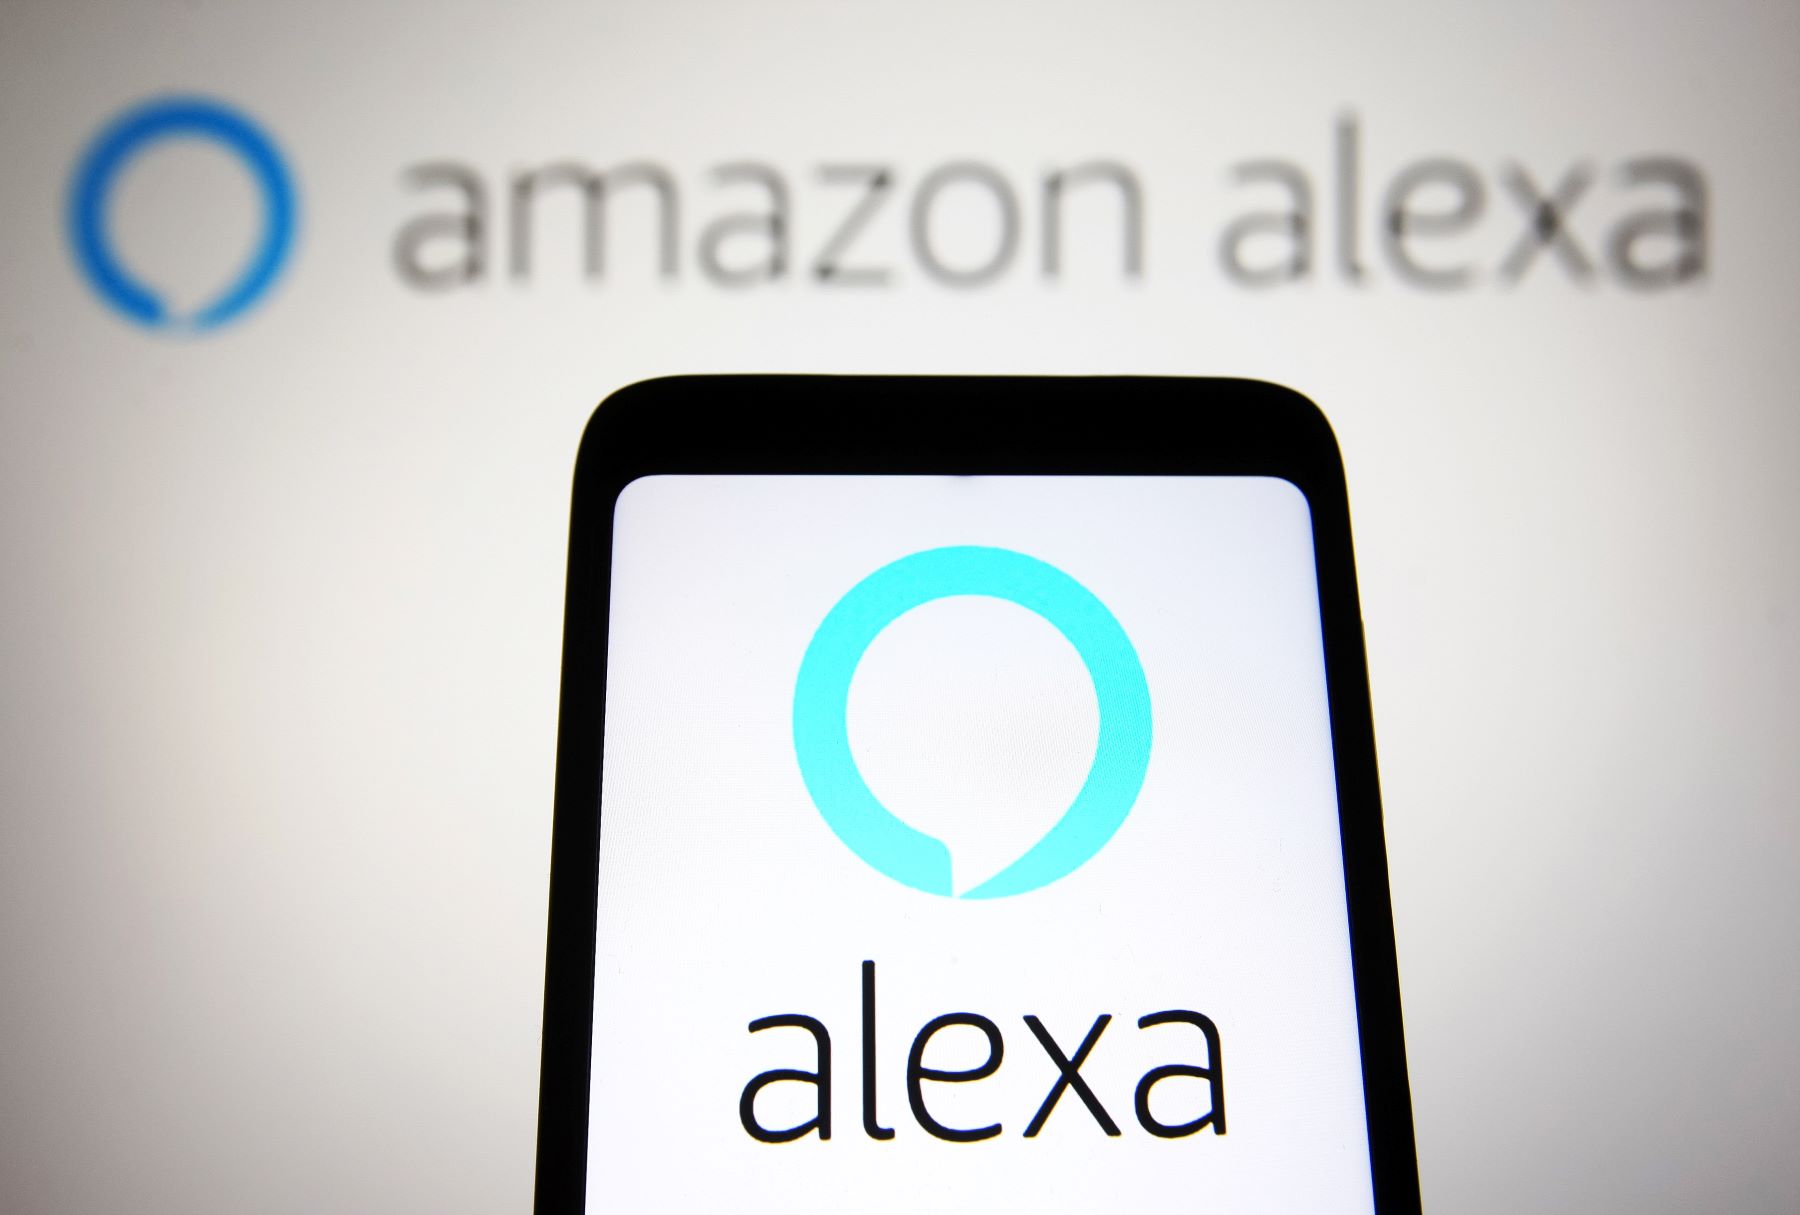 An Amazon Alexa graphic on a smartphone and in the background